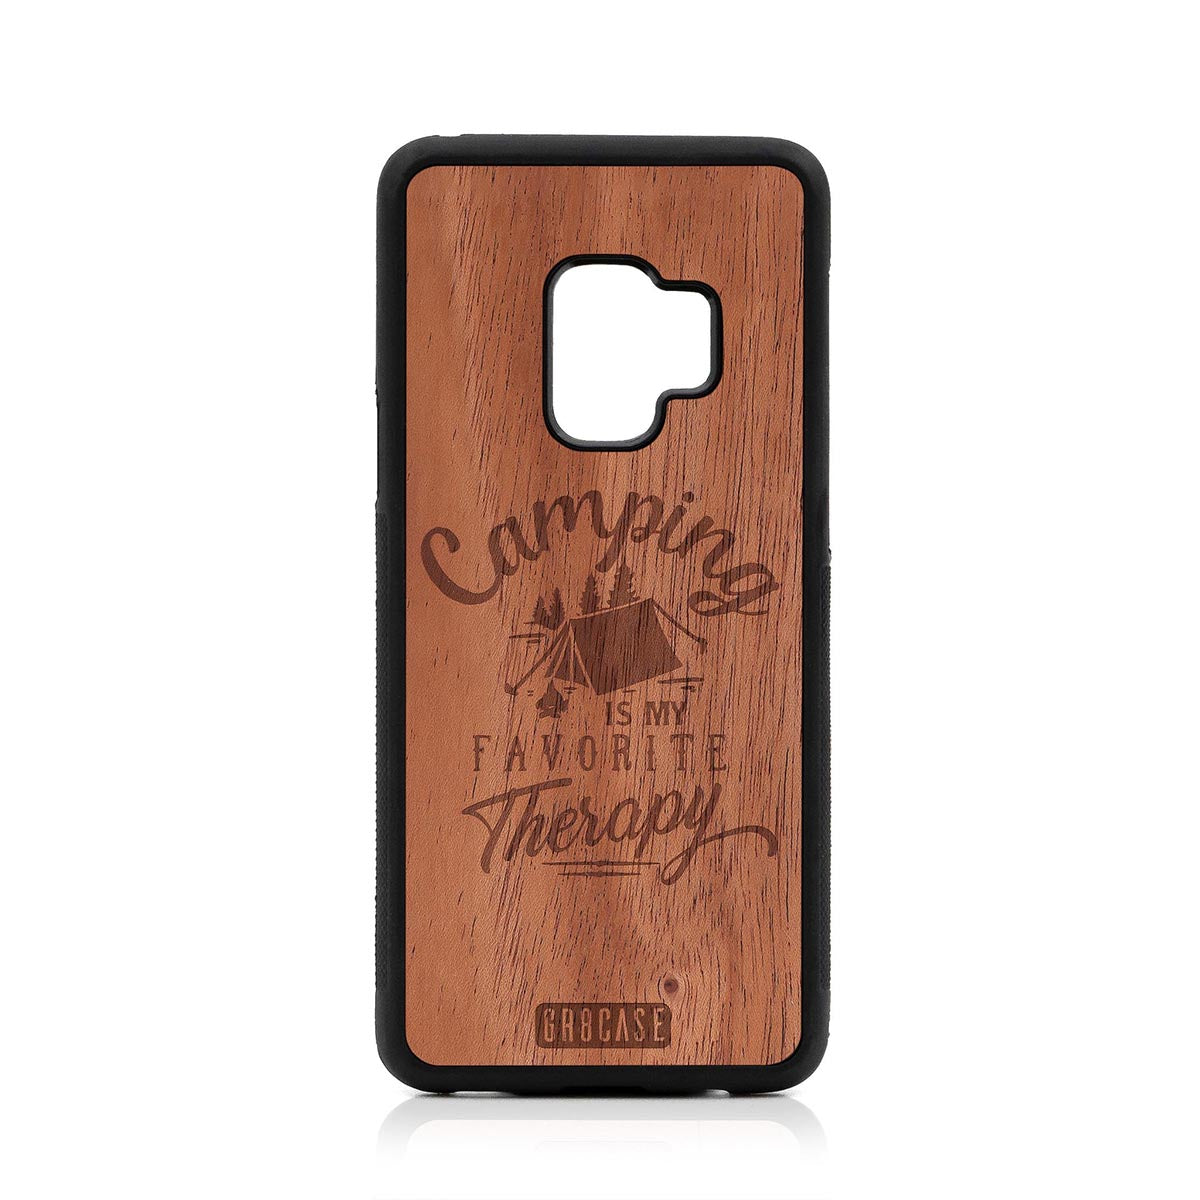 Camping Is My Favorite Therapy Design Wood Case For Samsung Galaxy S9 by GR8CASE